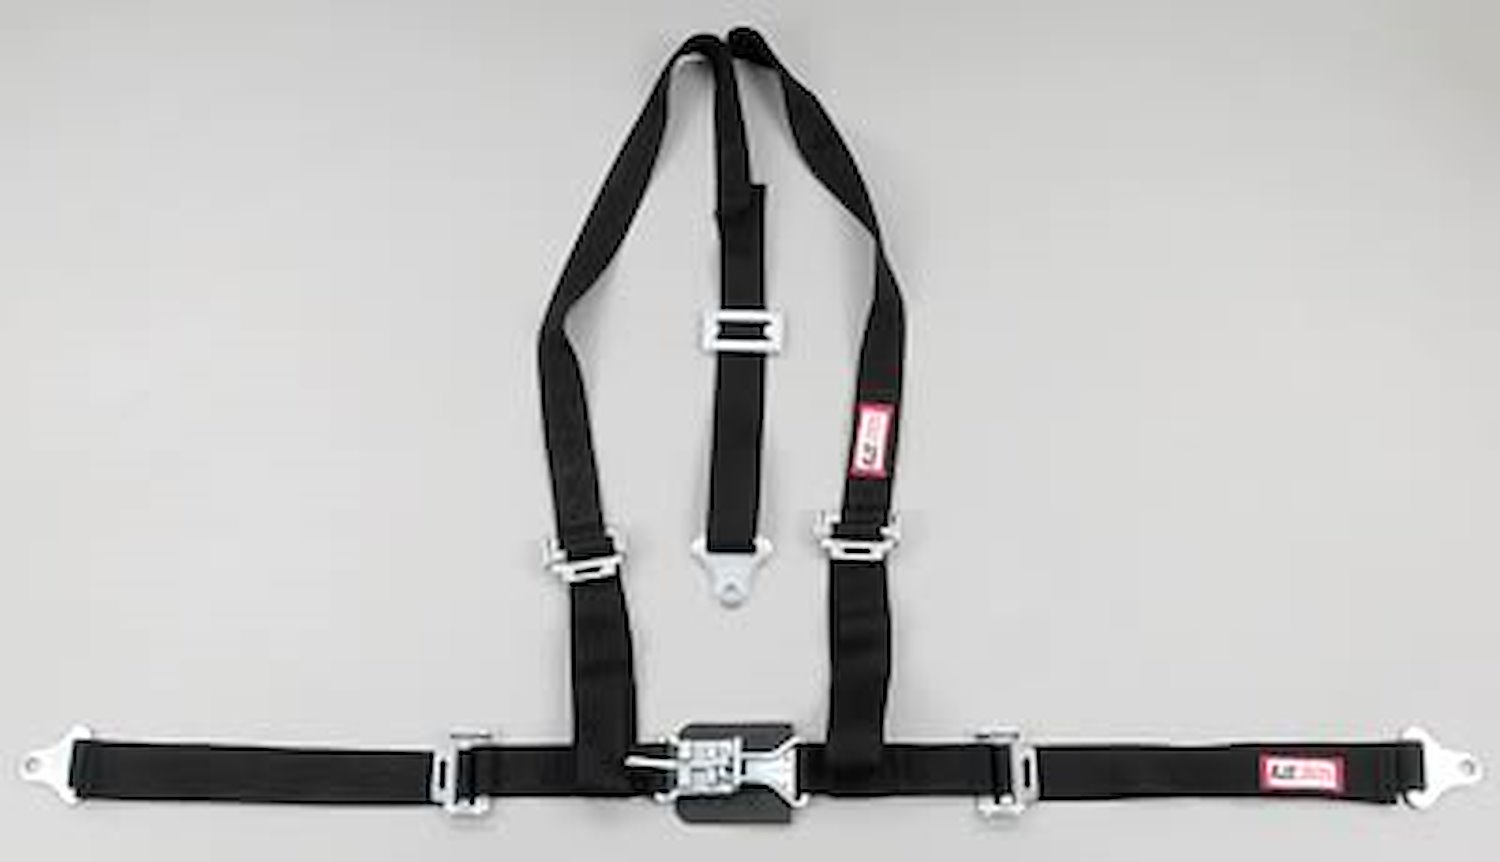 NON-SFI L&L HARNESS 2 PULL DOWN Lap Belt SNAP SEWN IN 2 S.H. INDIVIDUAL FLOOR Mount w/STERNUM STRAP WRAP/SNAP HOT PINK